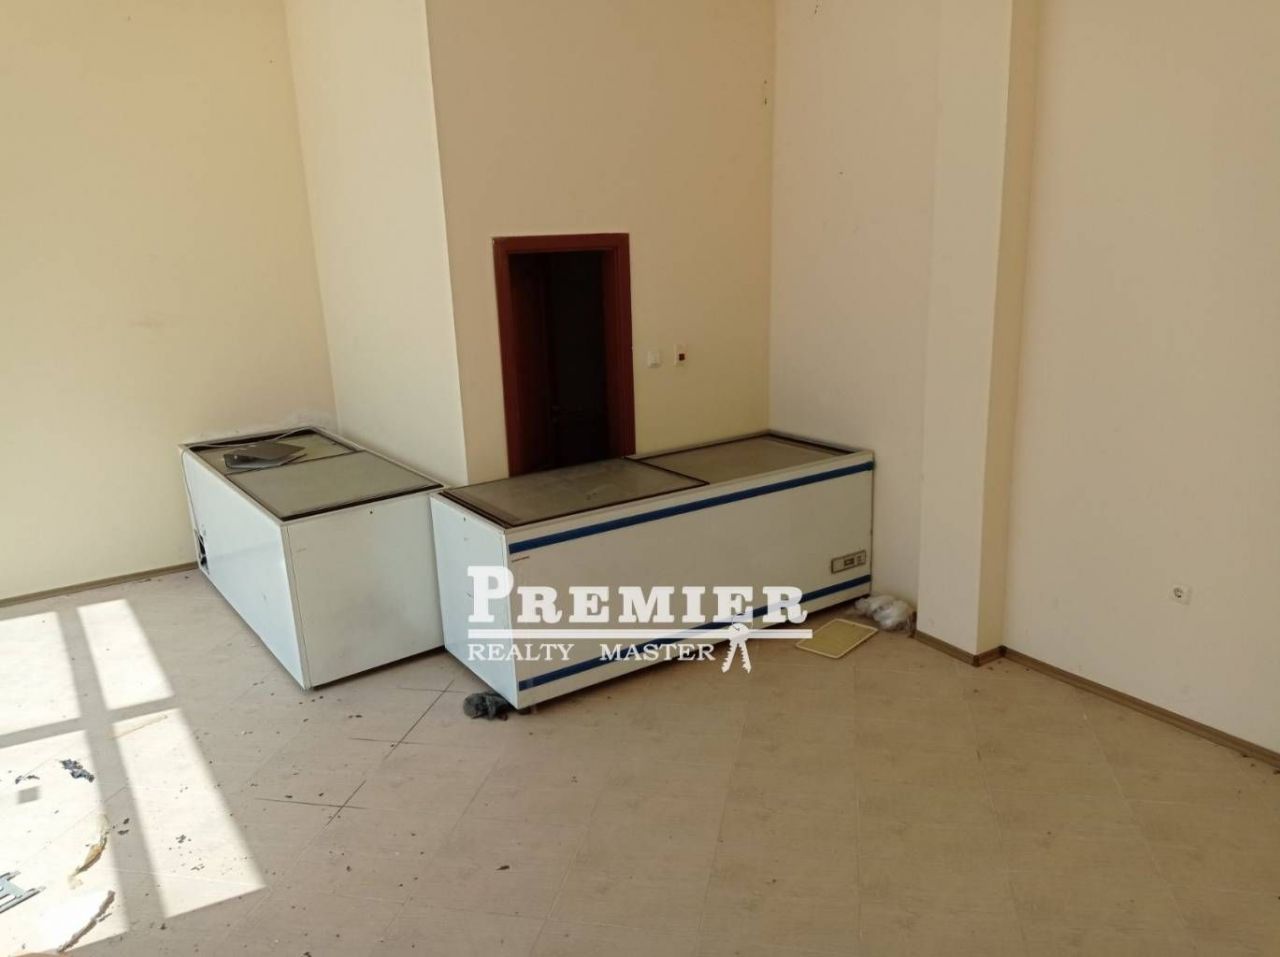 Commercial property at Sunny Beach, Bulgaria, 48.32 sq.m - picture 1